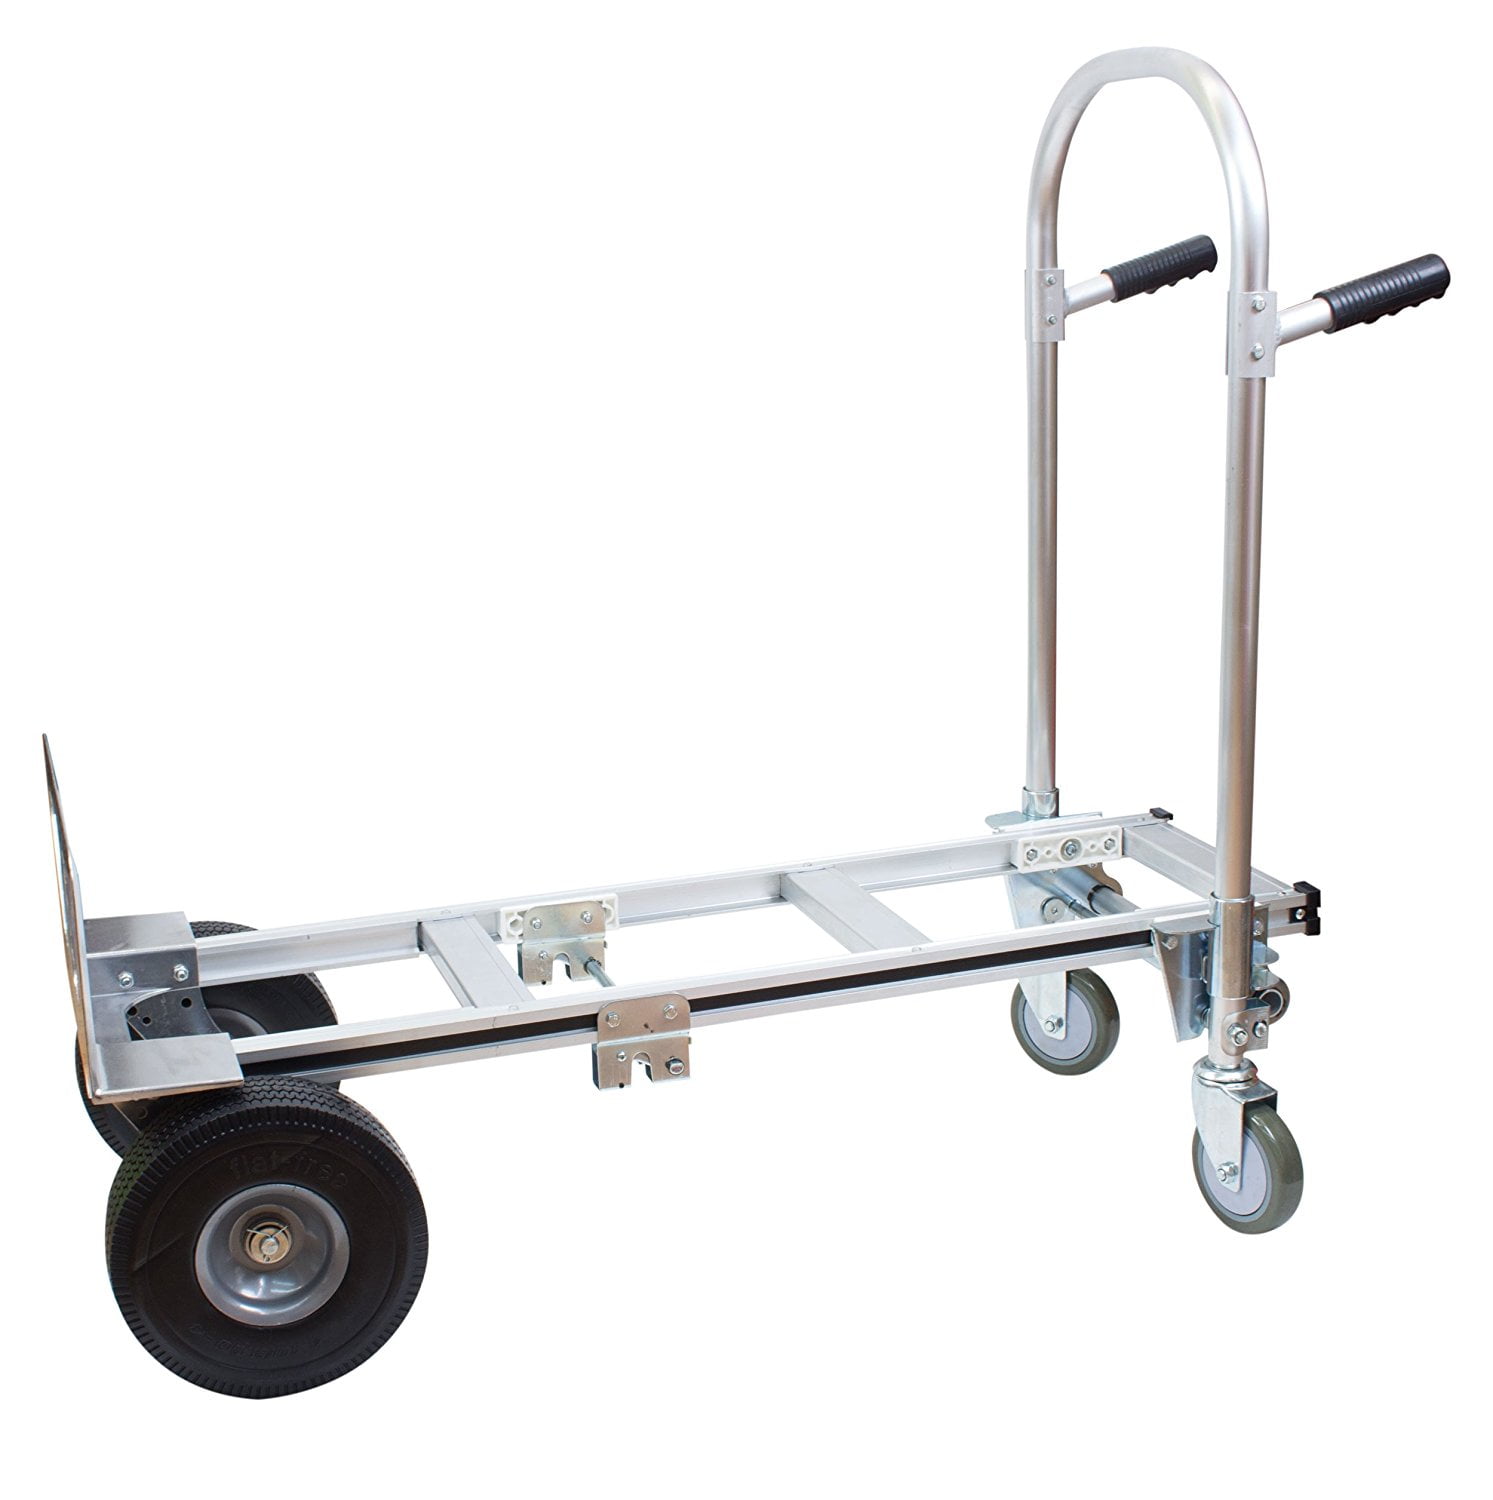 NK Heavy Duty PT-007 Aluminum Hand Truck Stair Climber Local Pickup Only 